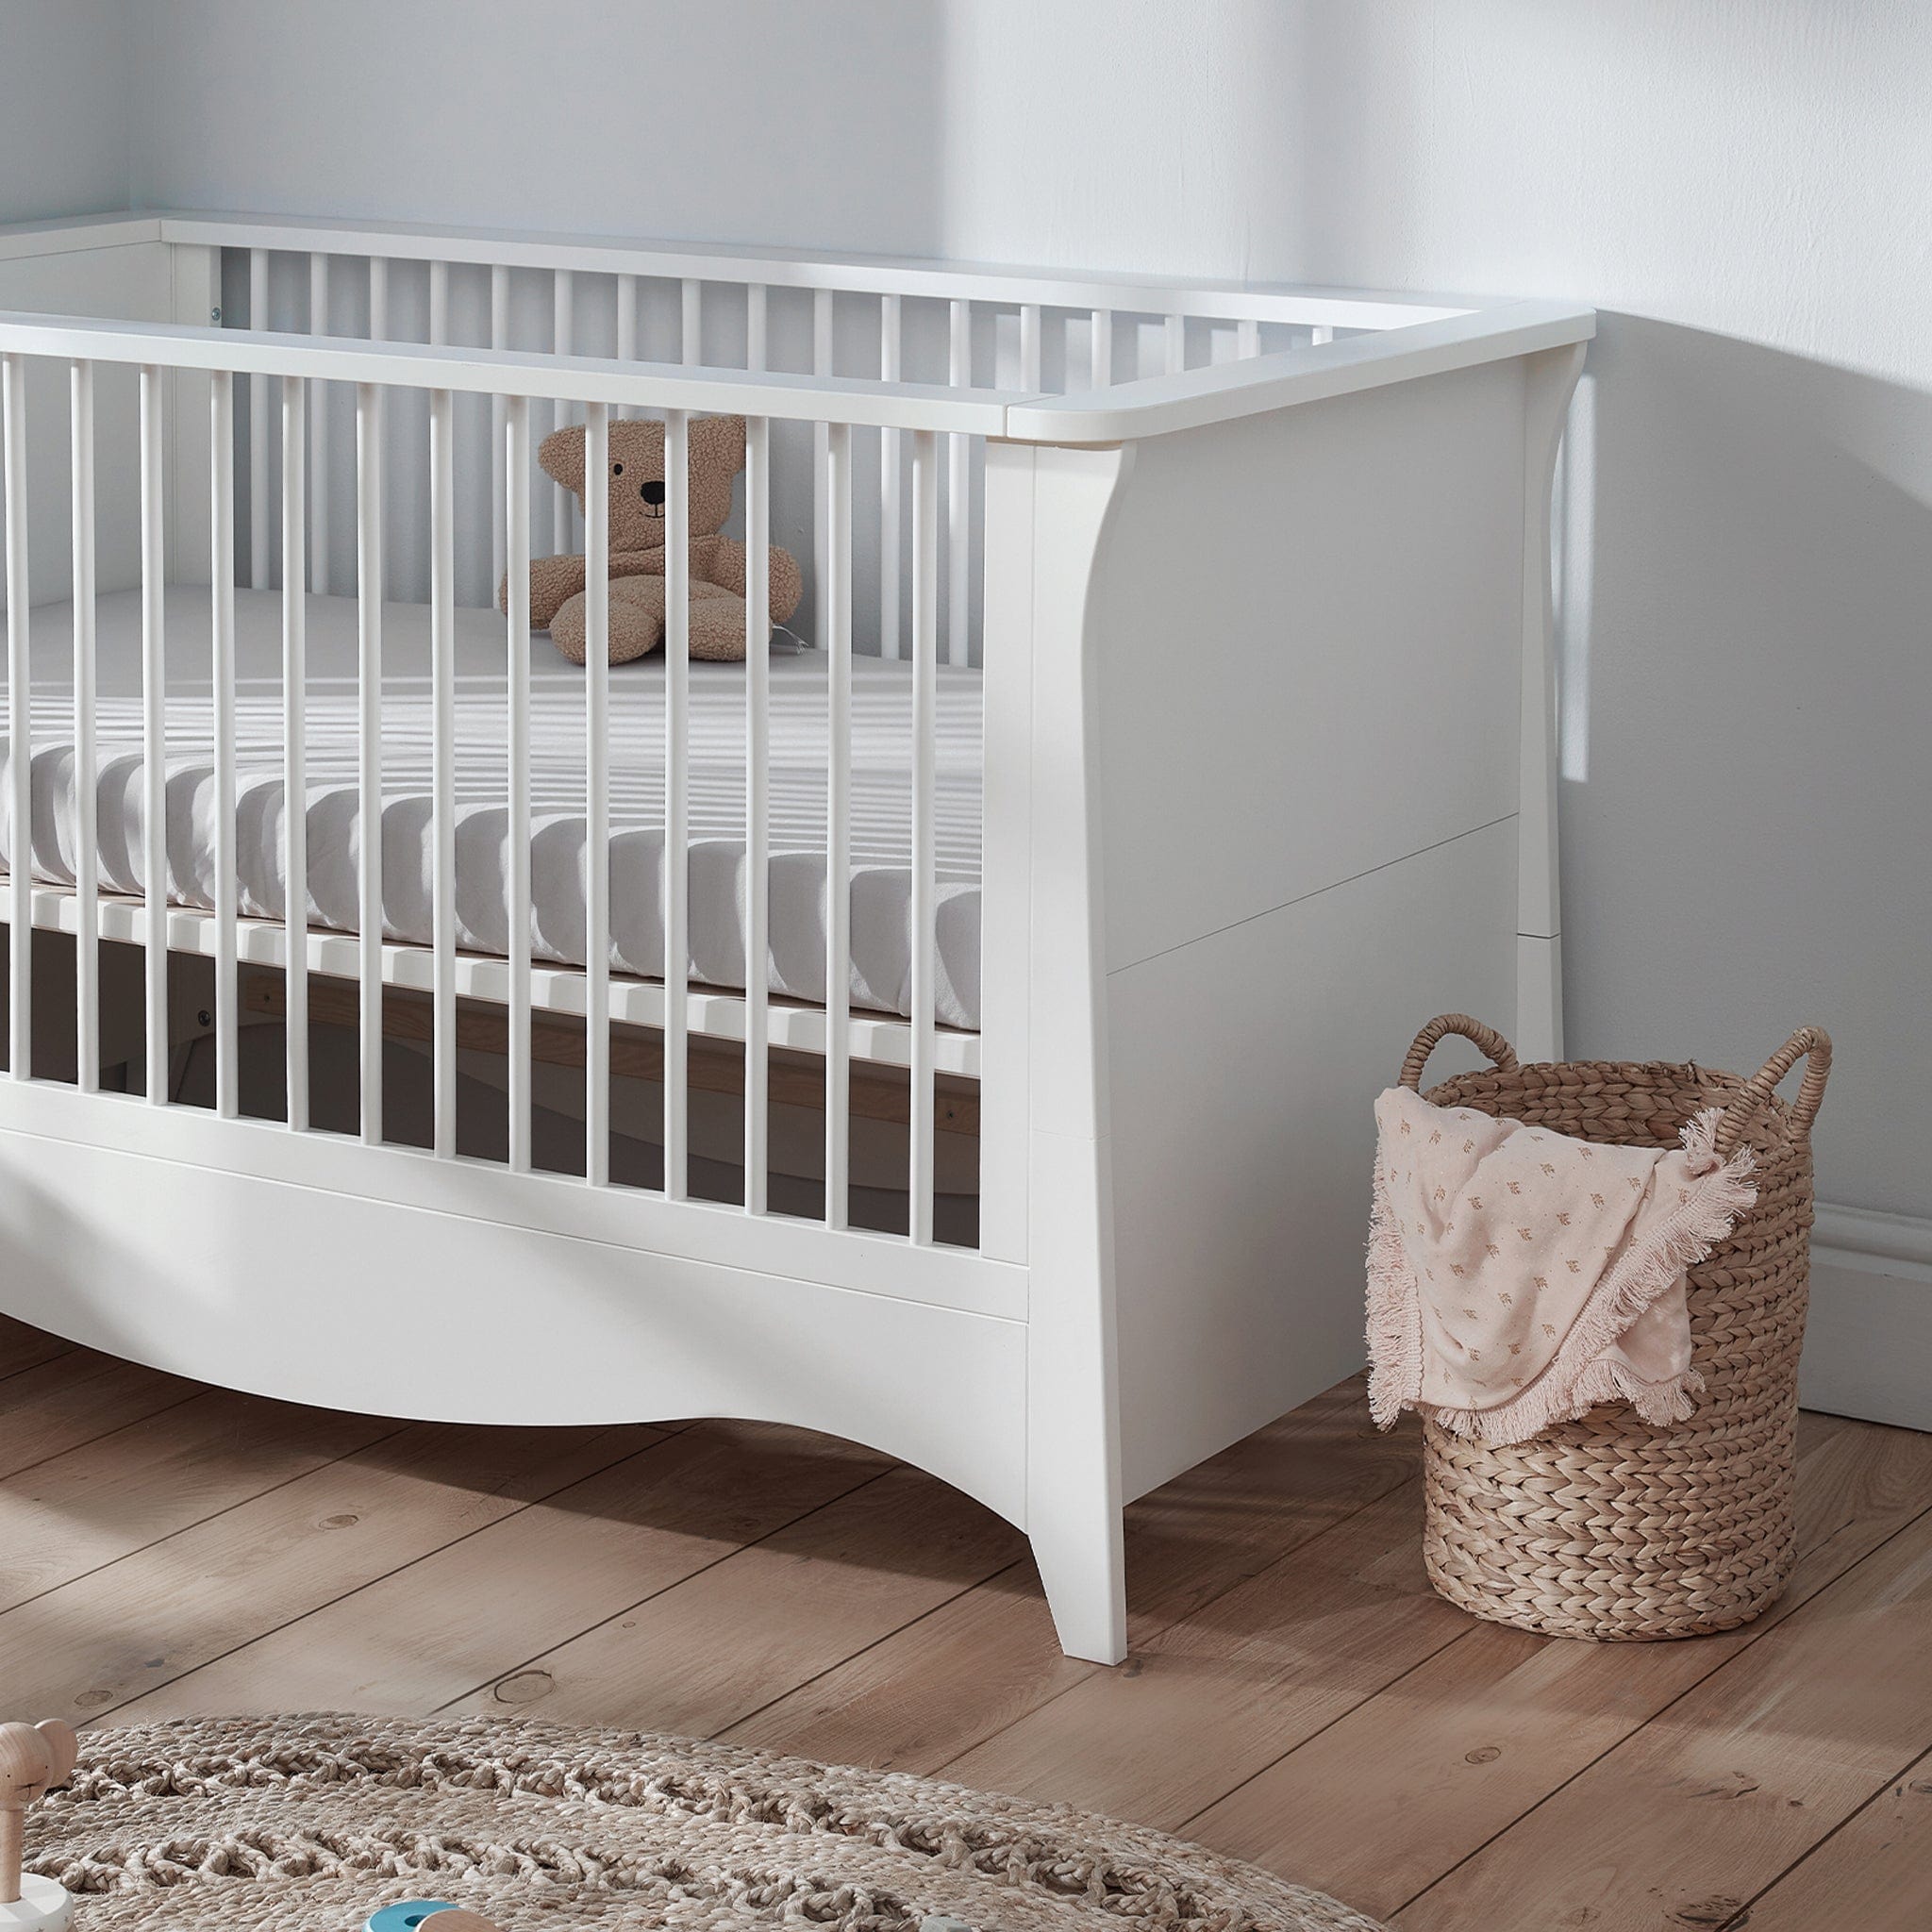 CuddleCo Nursery Room Sets CuddleCo Clara 2 Piece Cot Bed Set in White